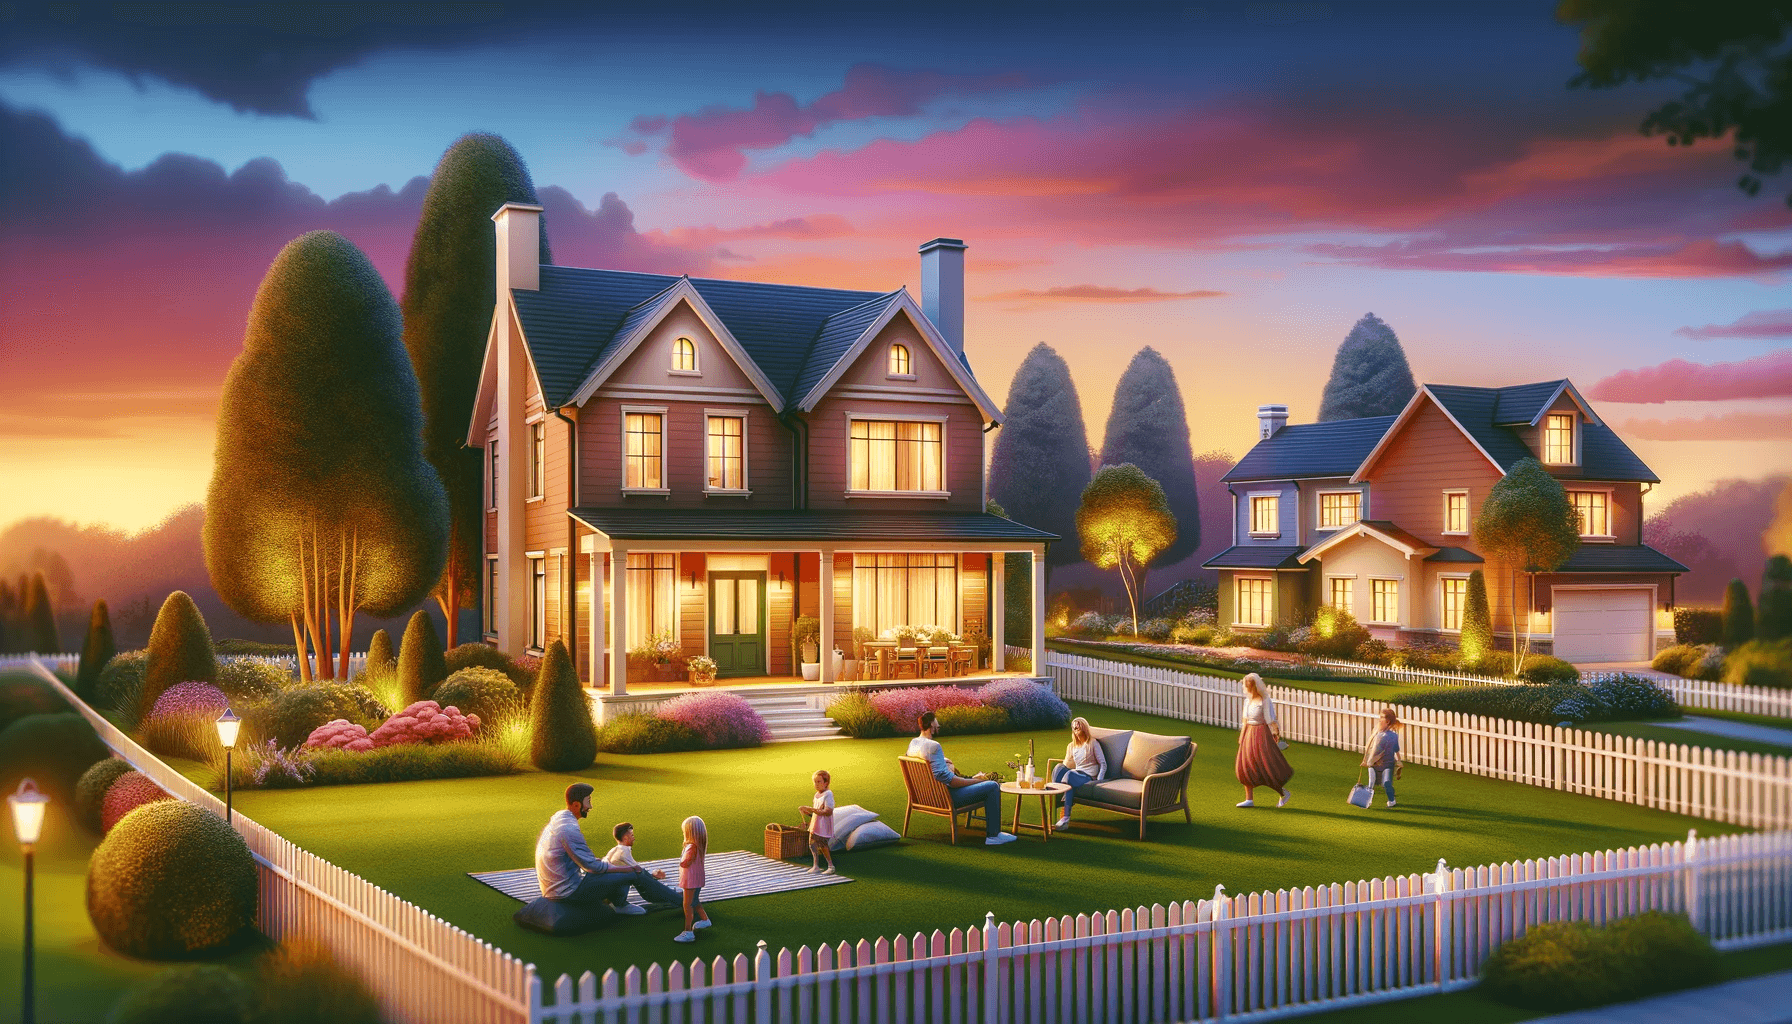 Family having a picnic in their front yard